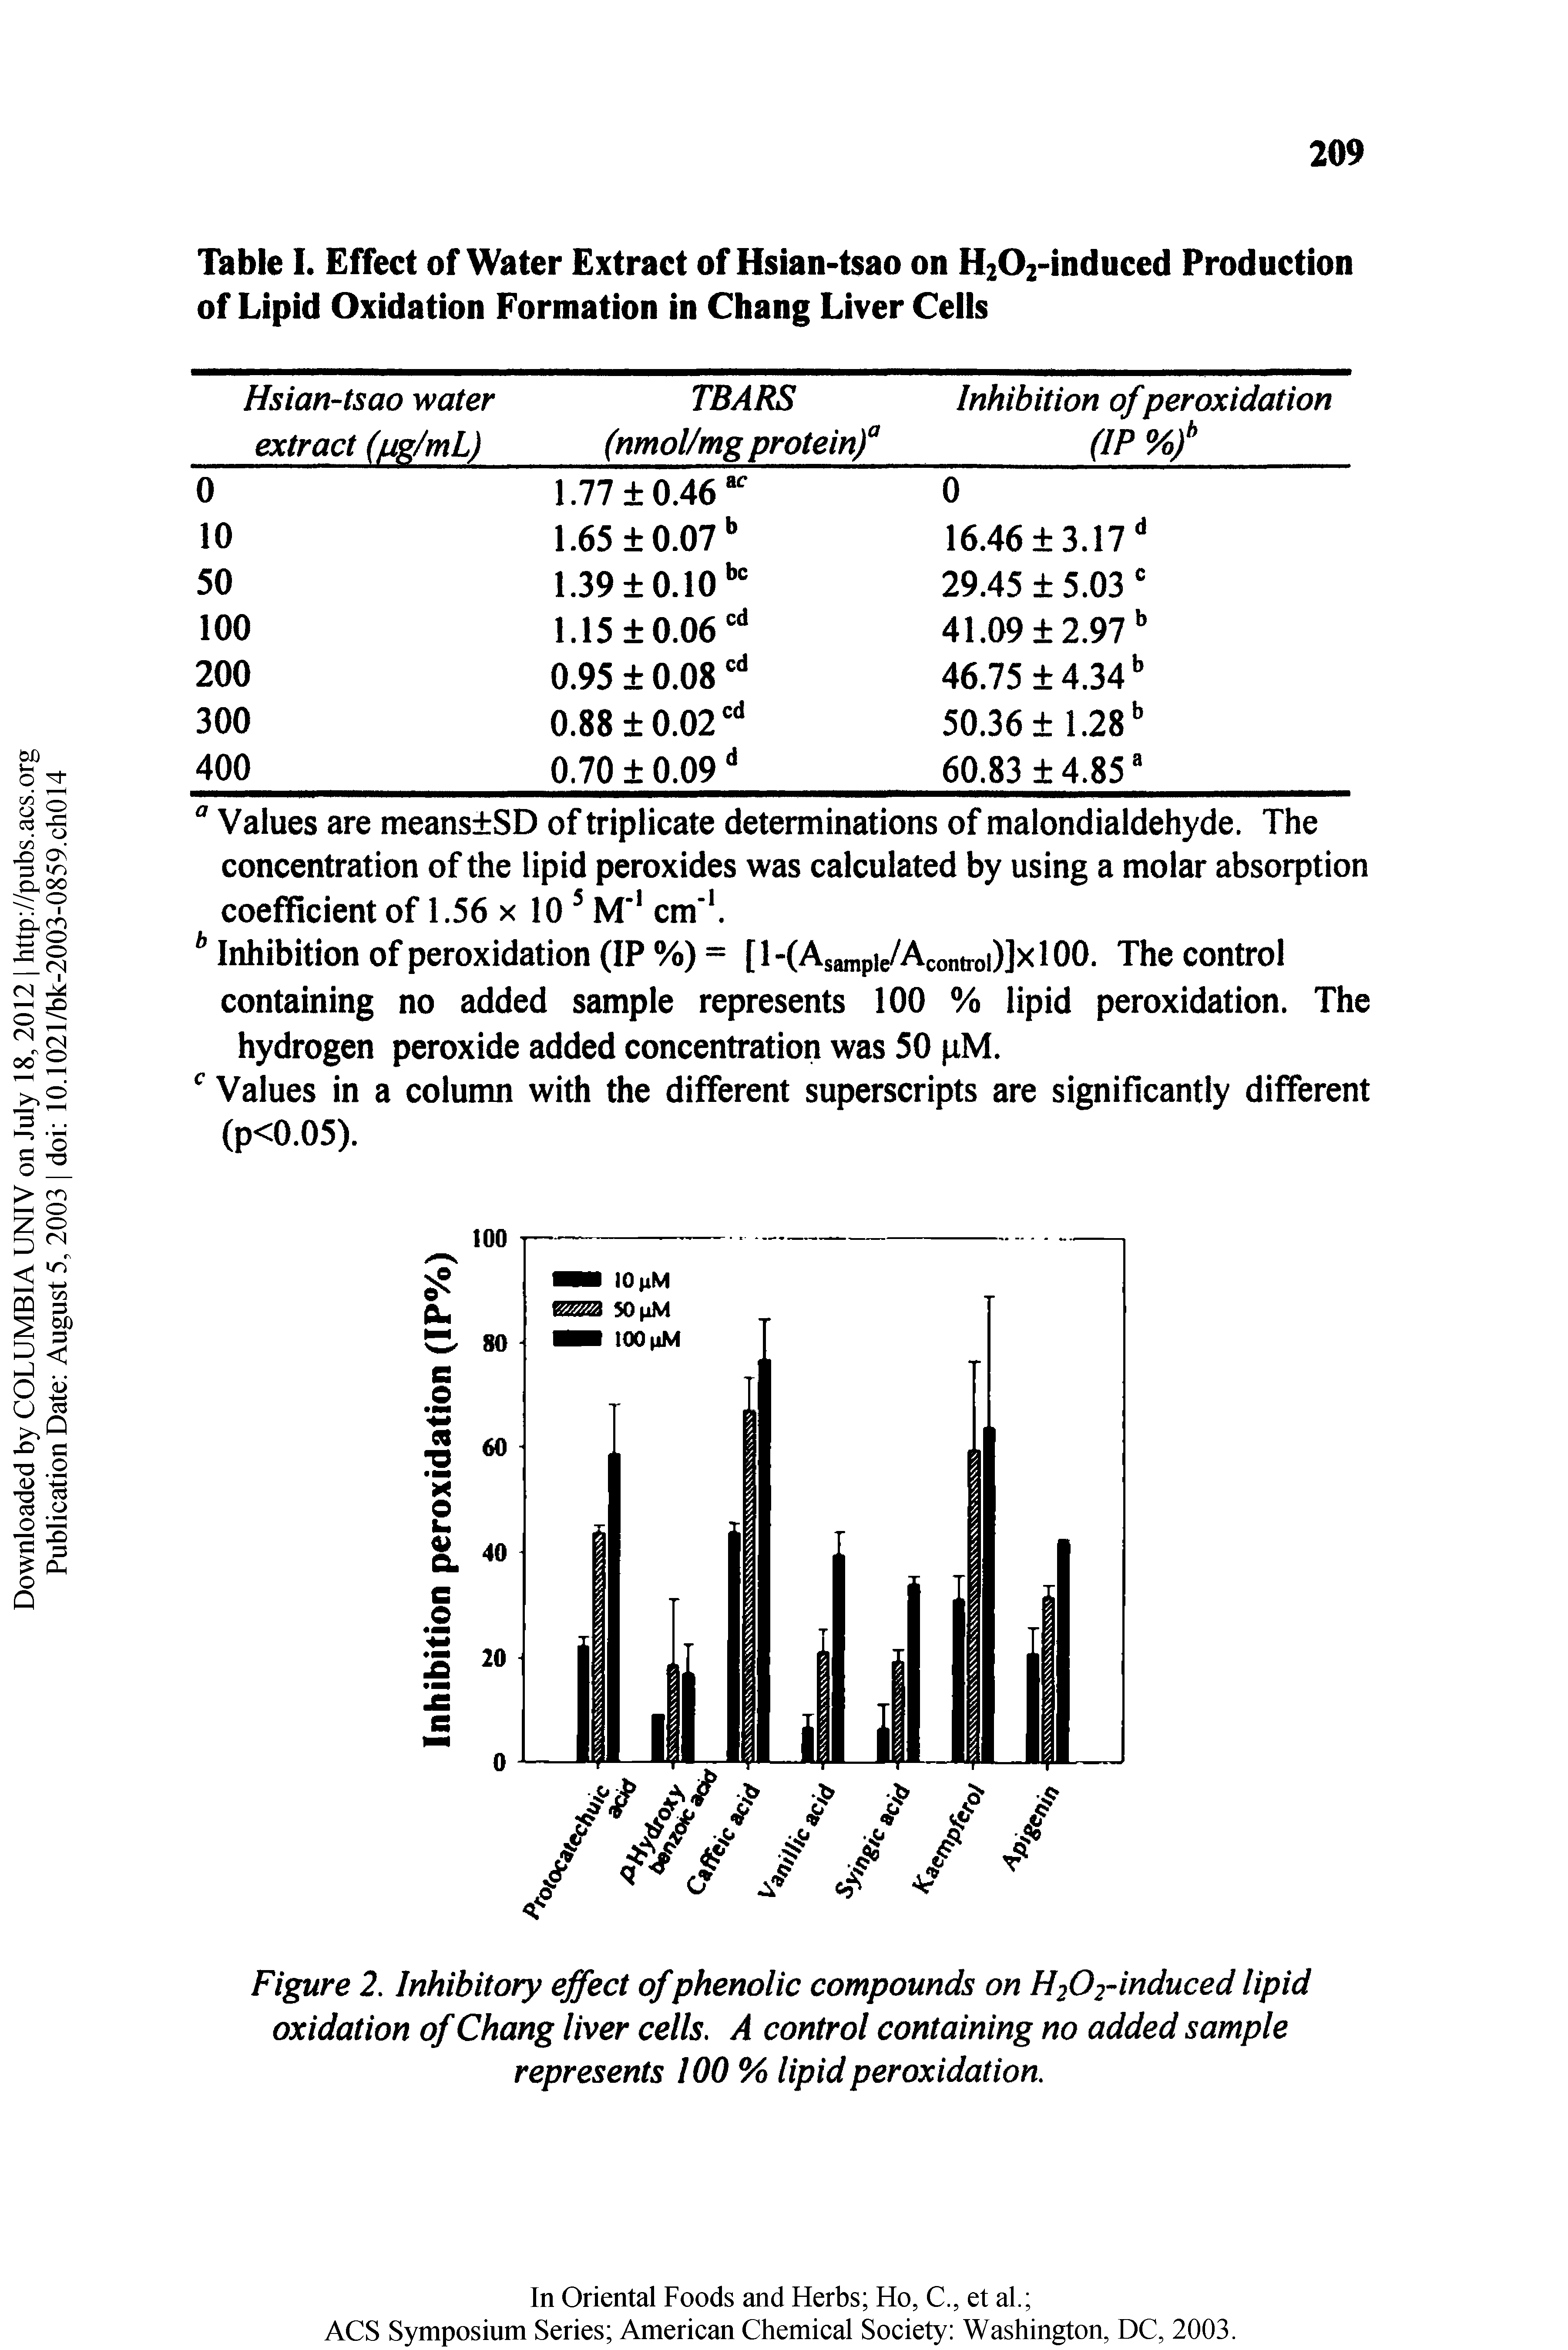 Table I. Effect of Water Extract of Hsian-tsao on H202-induced Production of Lipid Oxidation Formation in Chang Liver Cells...